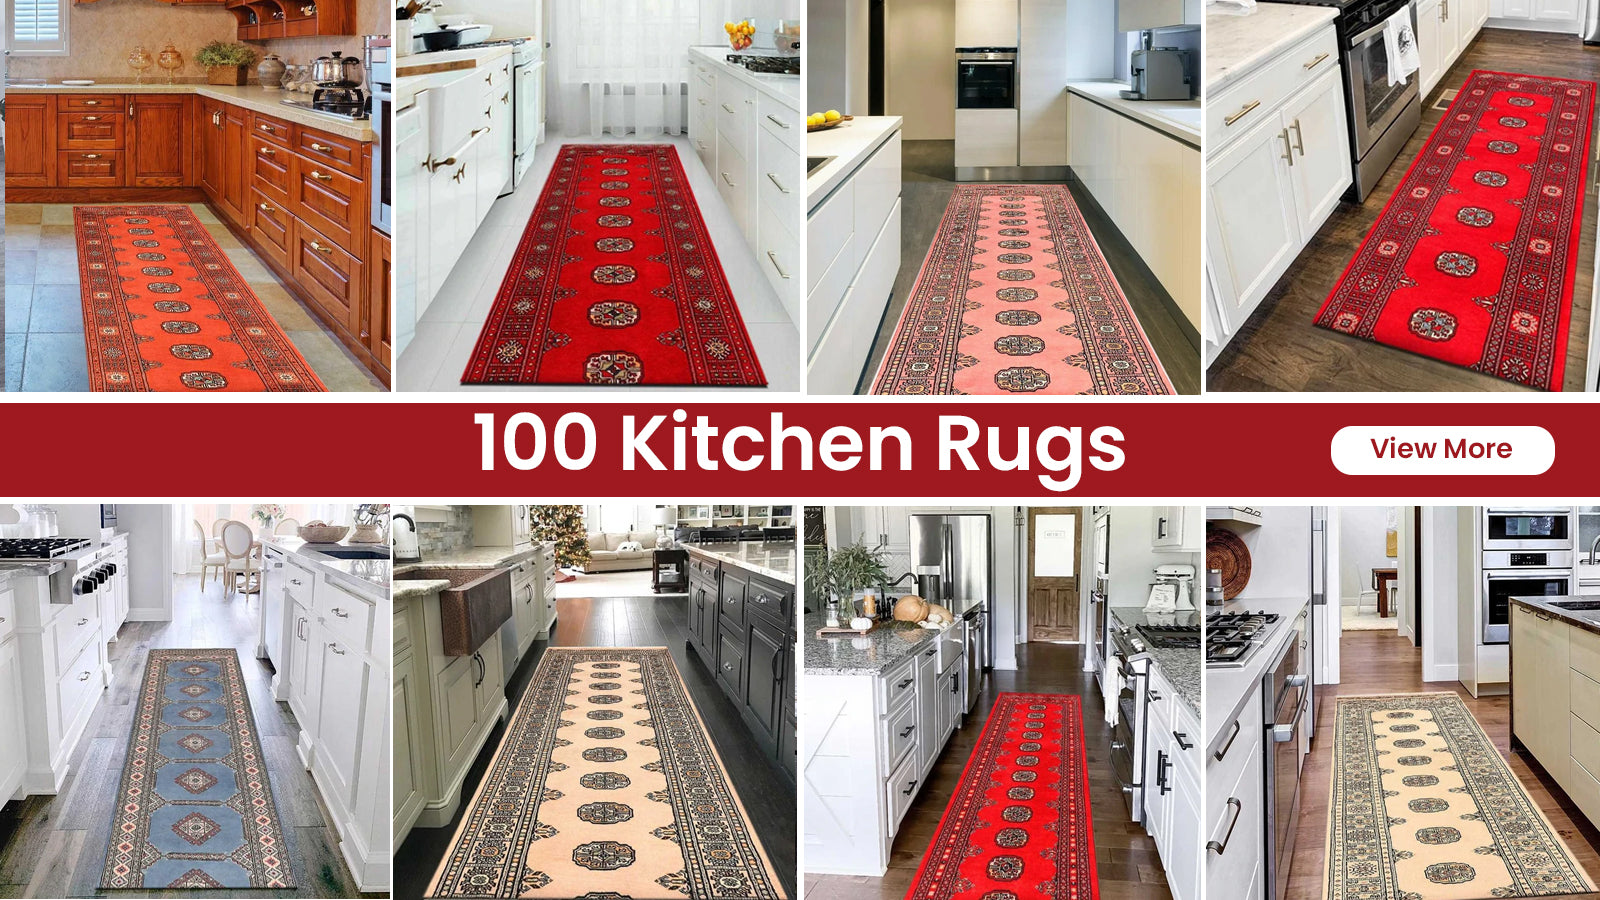 Best Kitchen Area Rugs: 5 Tips for Choosing the Perfect Kitchen Rug